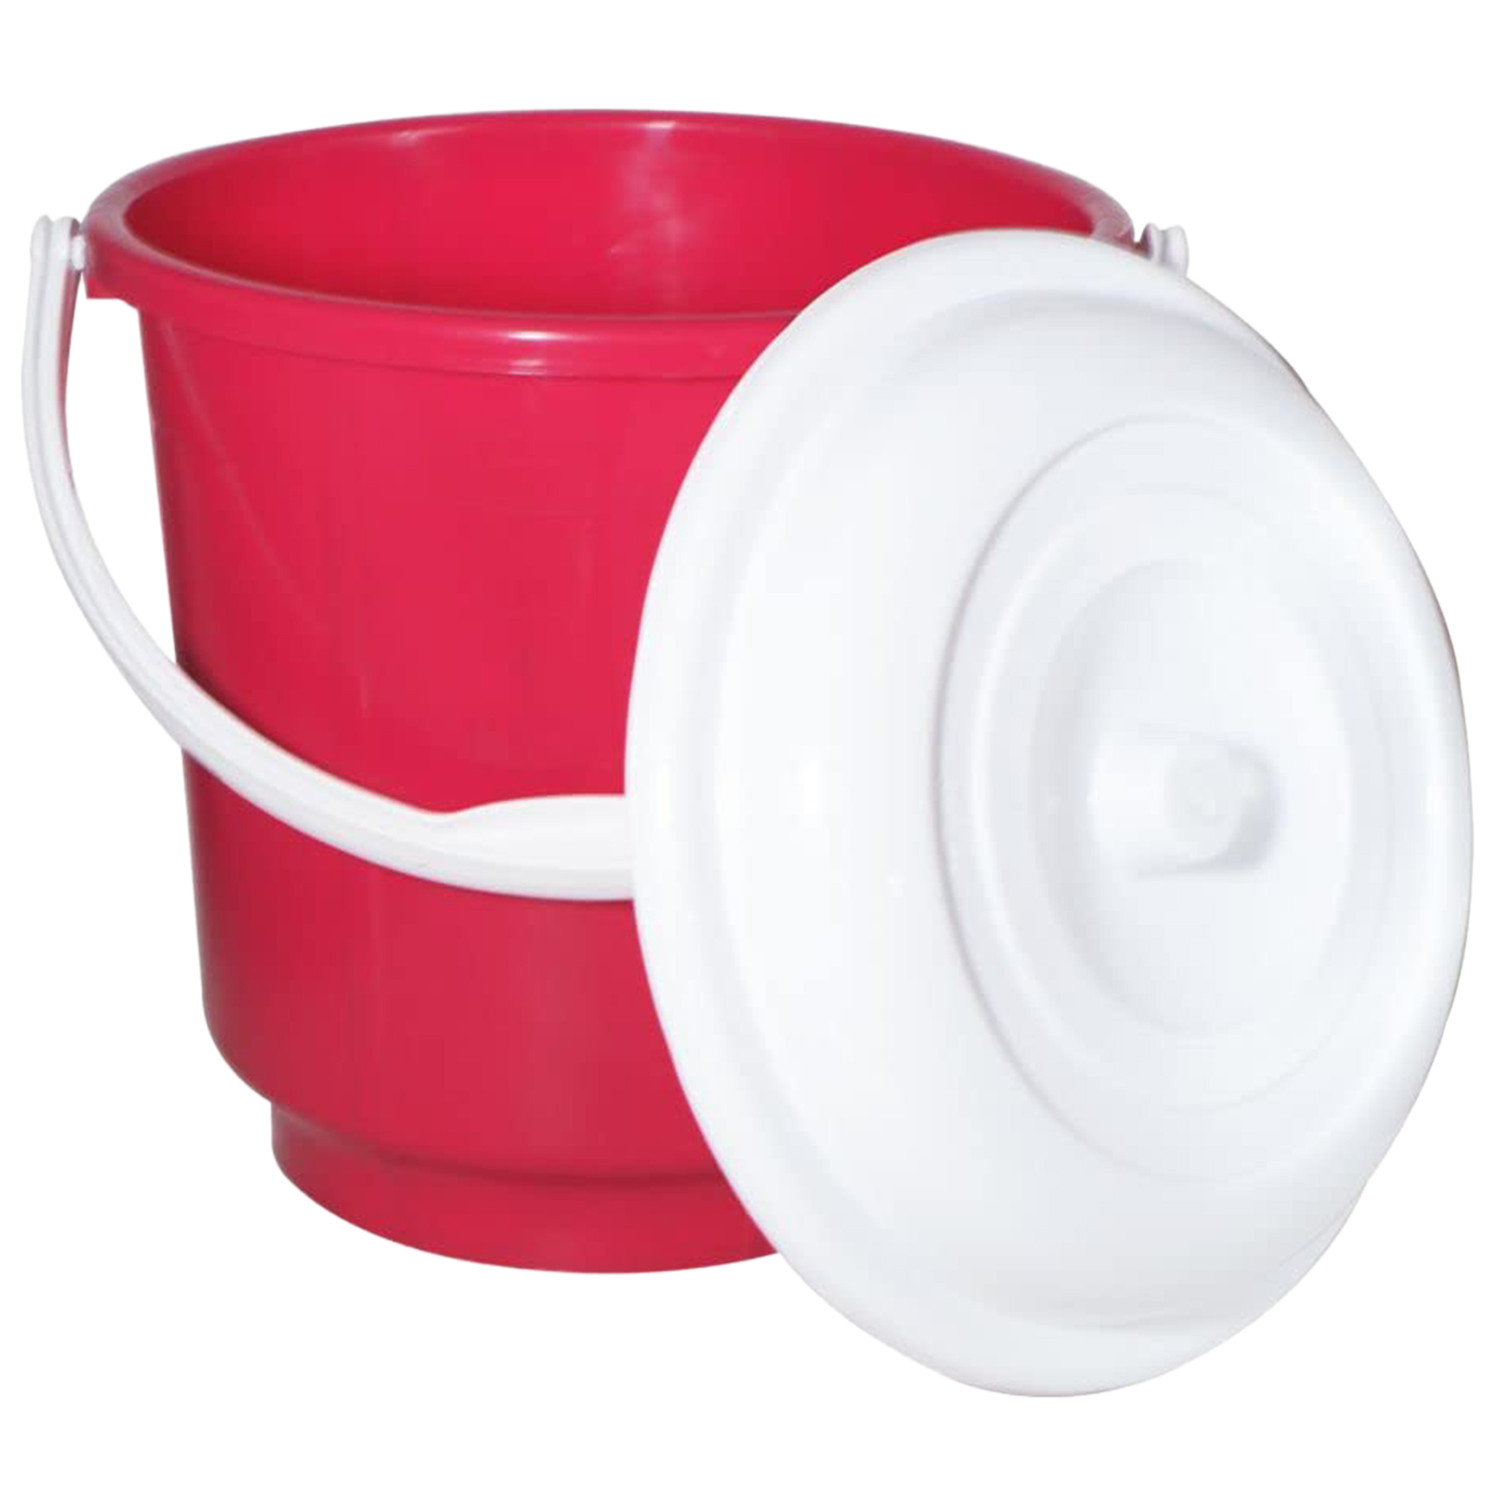 Kuber Industries Multipurposes Plastic Bucket For Bathing Home Cleaning & Storage Purpose With Lid, 18Ltr. (Red)-47KM01157